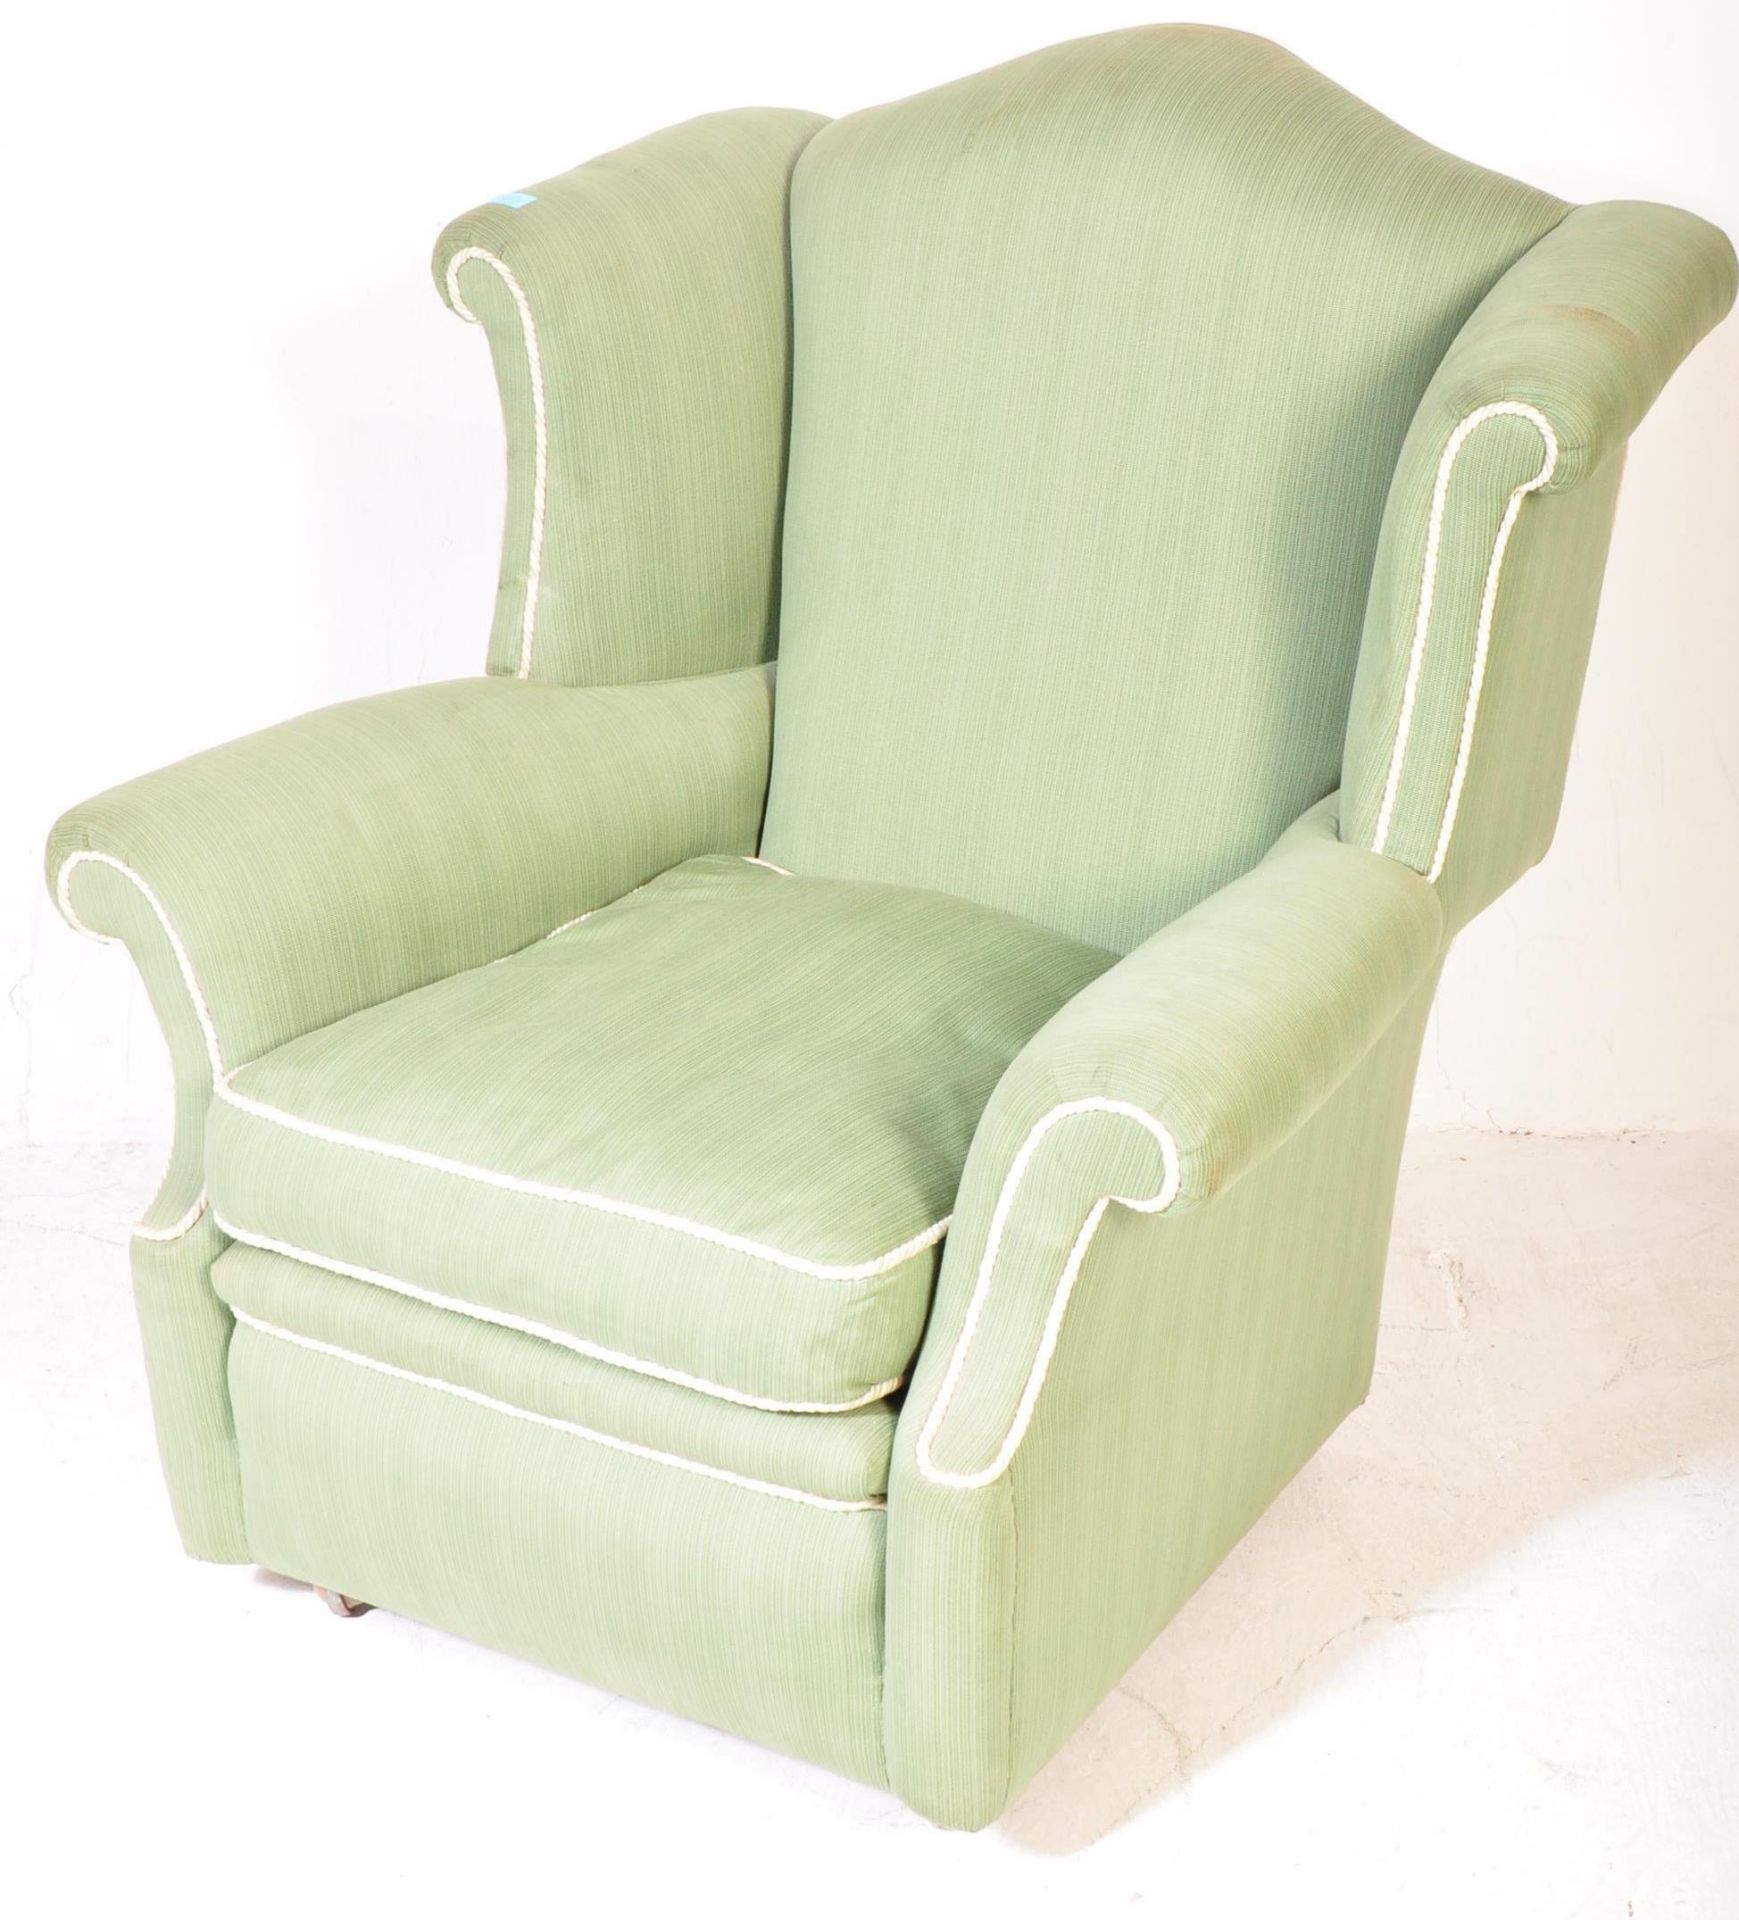 RETRO MID 20TH CENTURY UPHOLSTERED WINGBACK ARMCHAIR - Image 2 of 7